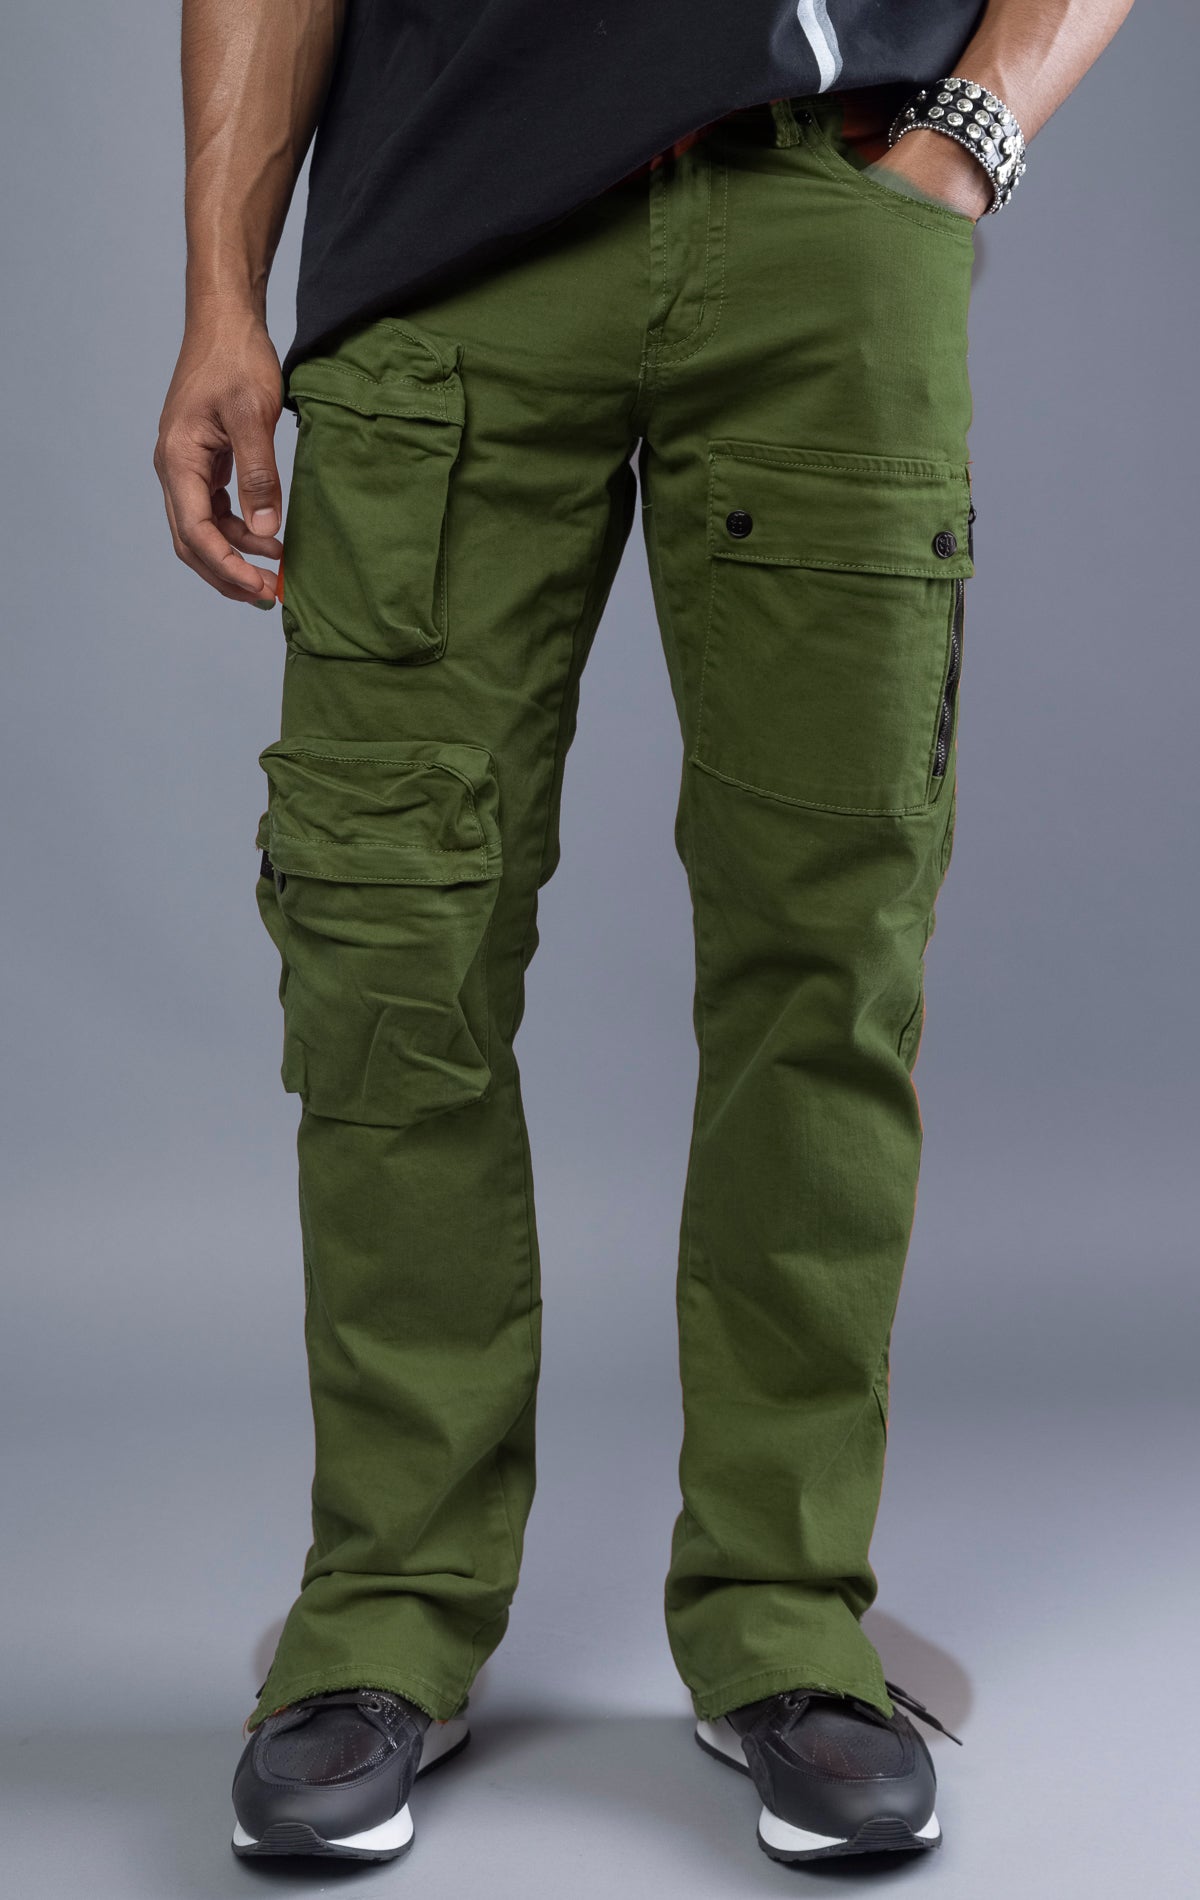 Men's cargo pants with multiple pockets for function. Regular, tapered fit with a comfortable rise. Available in orange and olive colors.